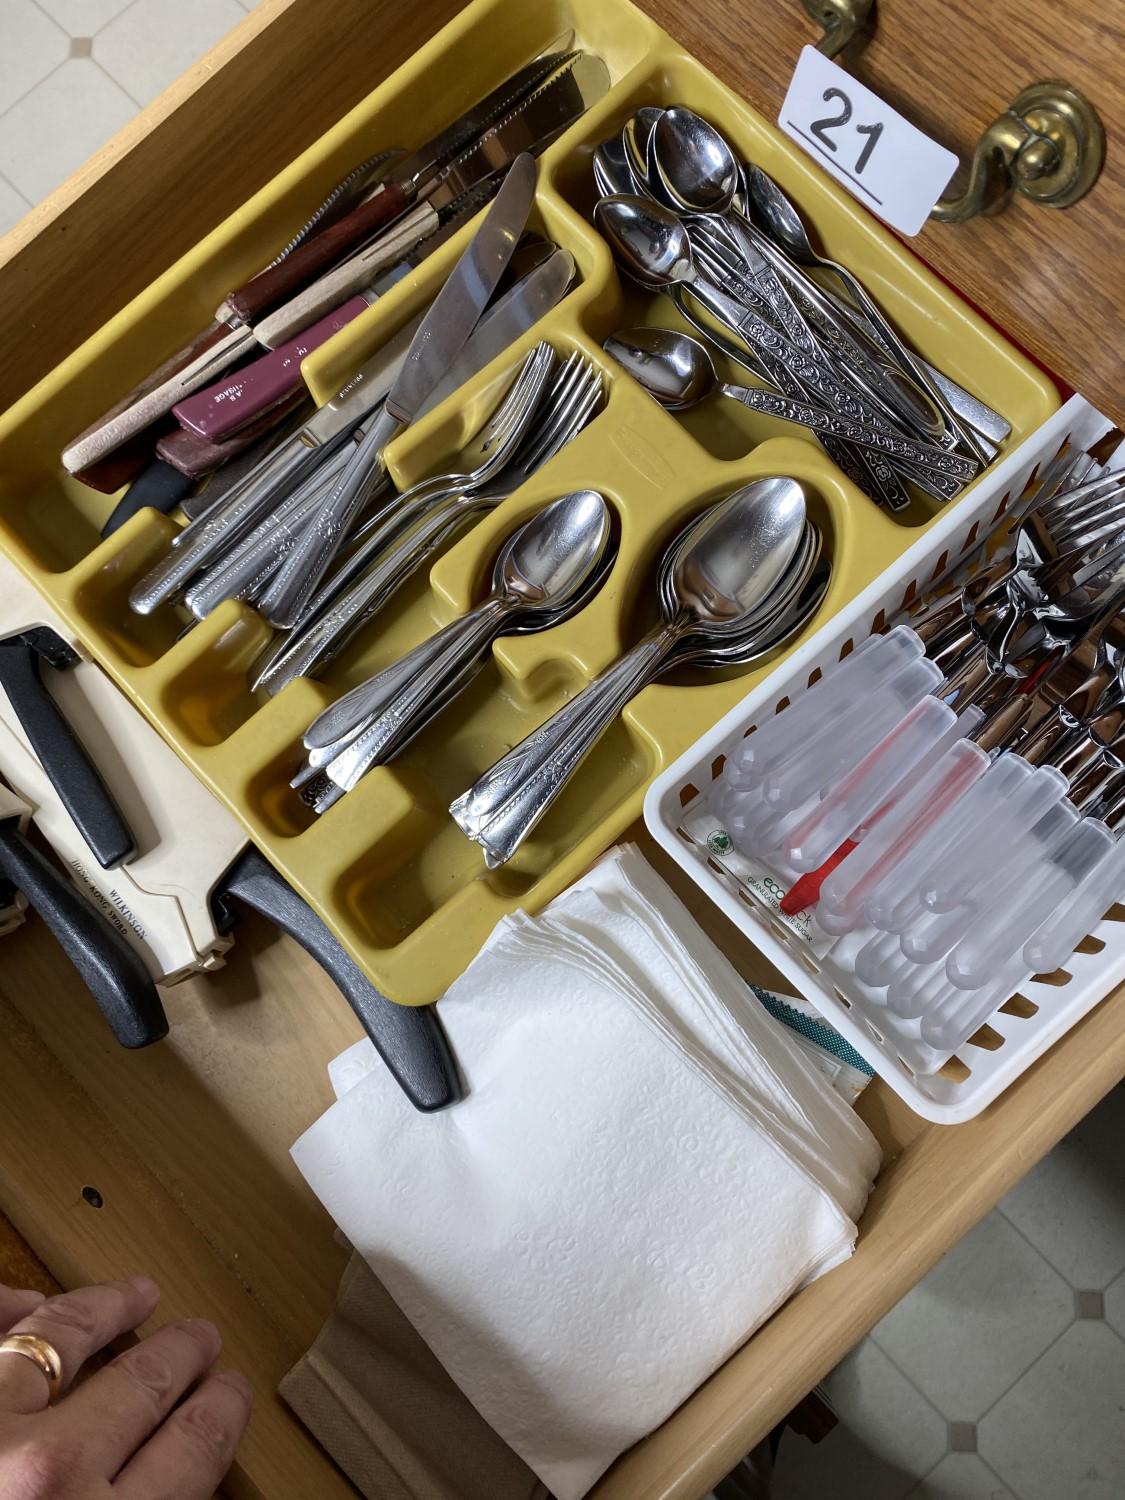 Contents of drawers including silverware, knives